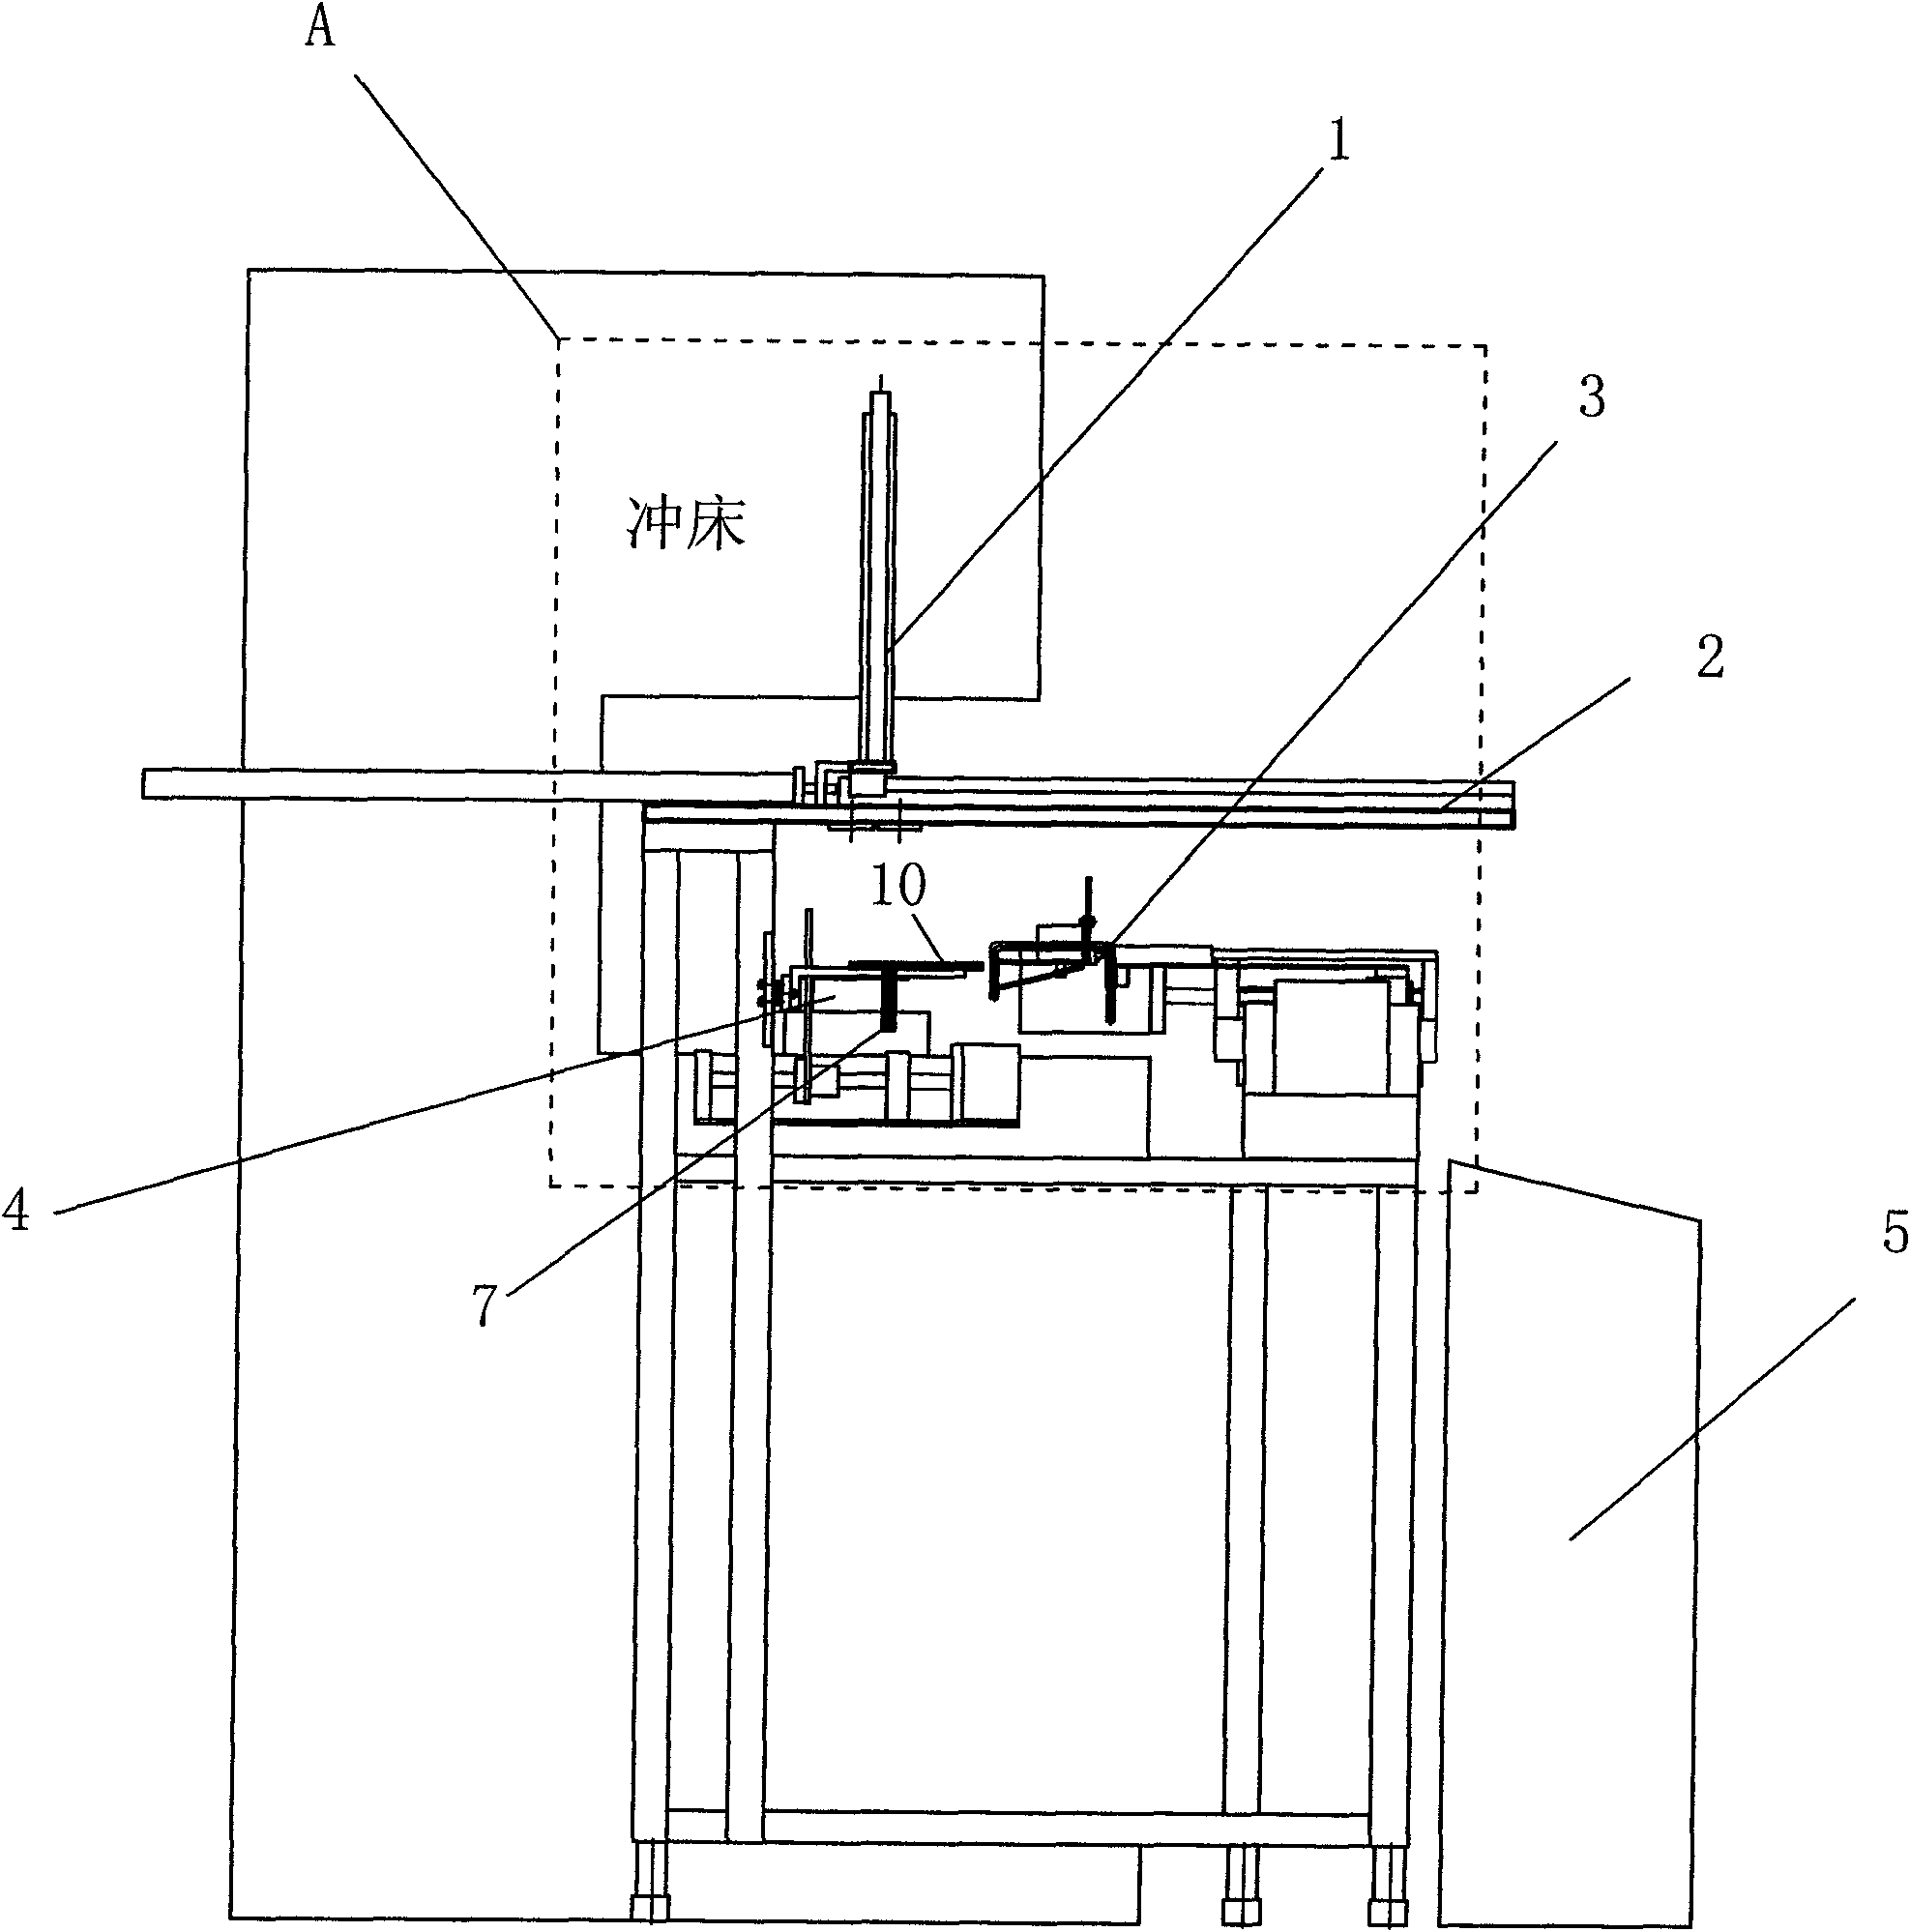 Automatic material loading, feeding and unloading equipment for bar stock blanking and method thereof